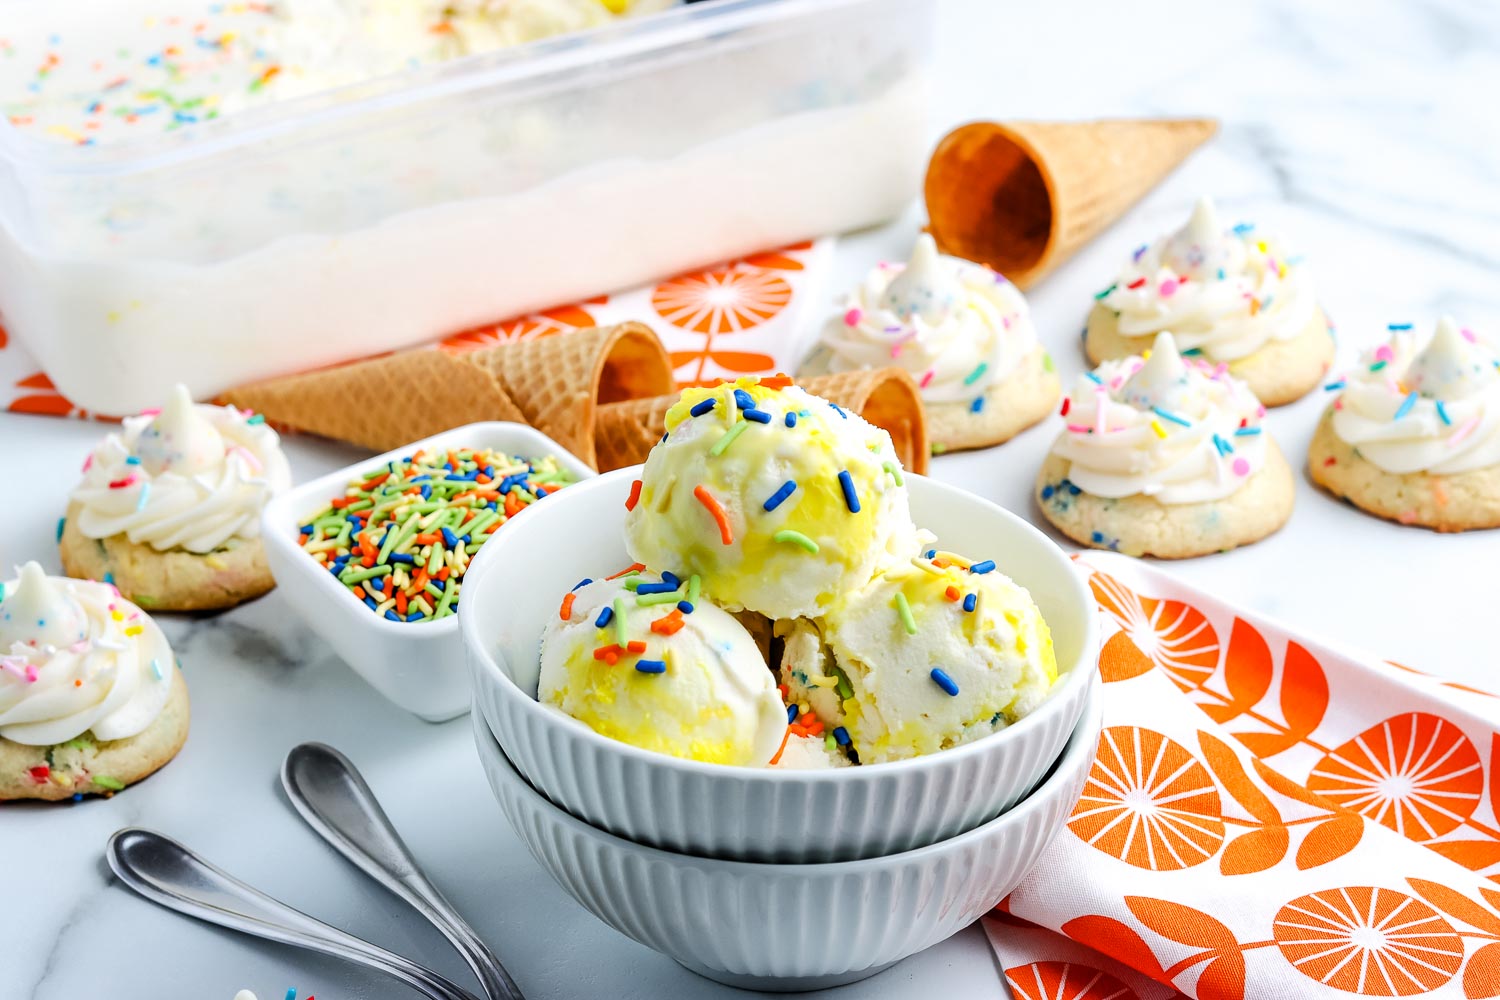 Funfetti ice cream in white bowls with birthday frosted cookies in the background.